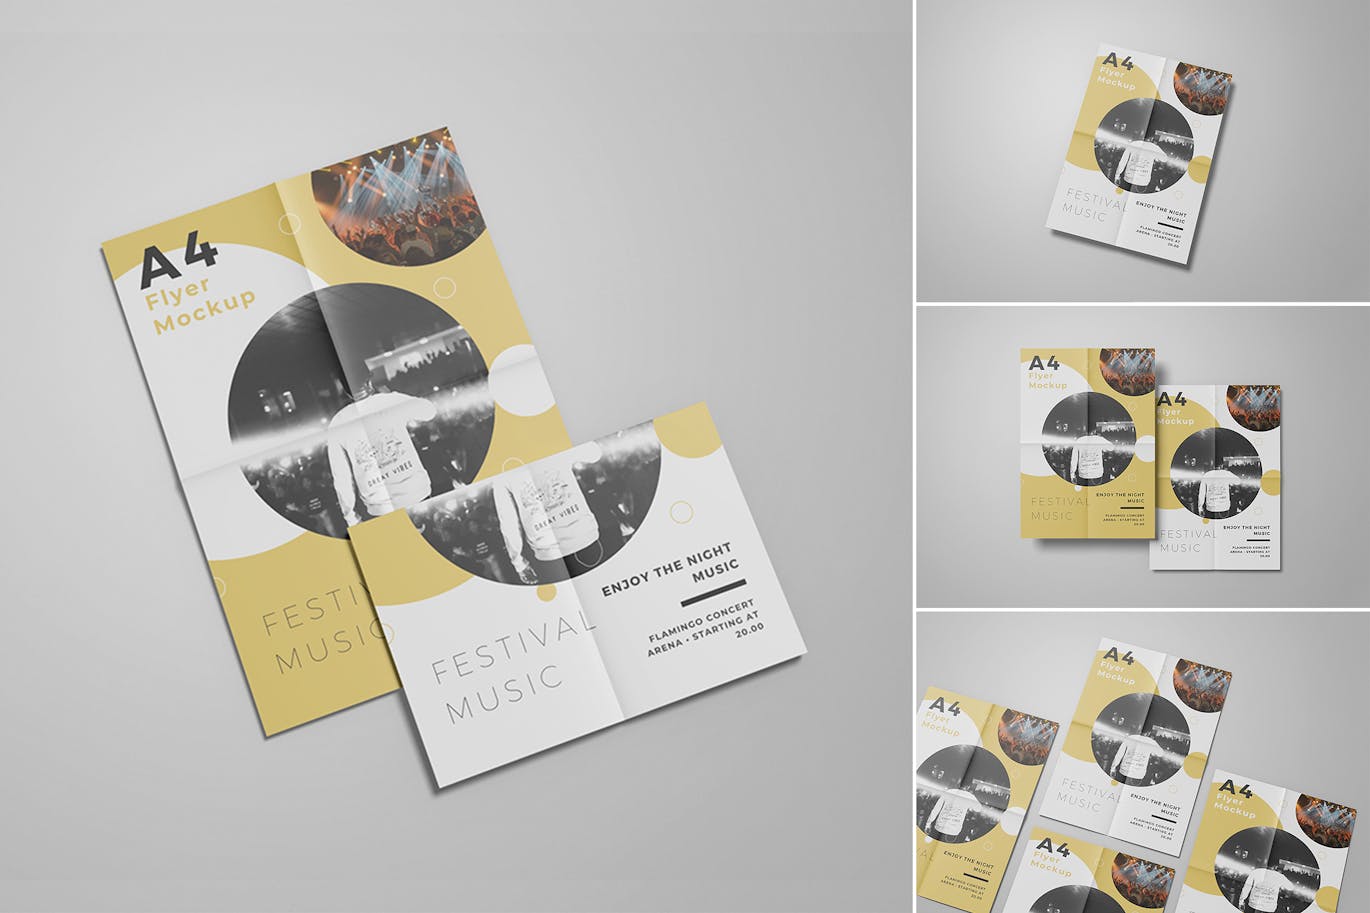 A4 Flyer Mockup Collections-2.jpg